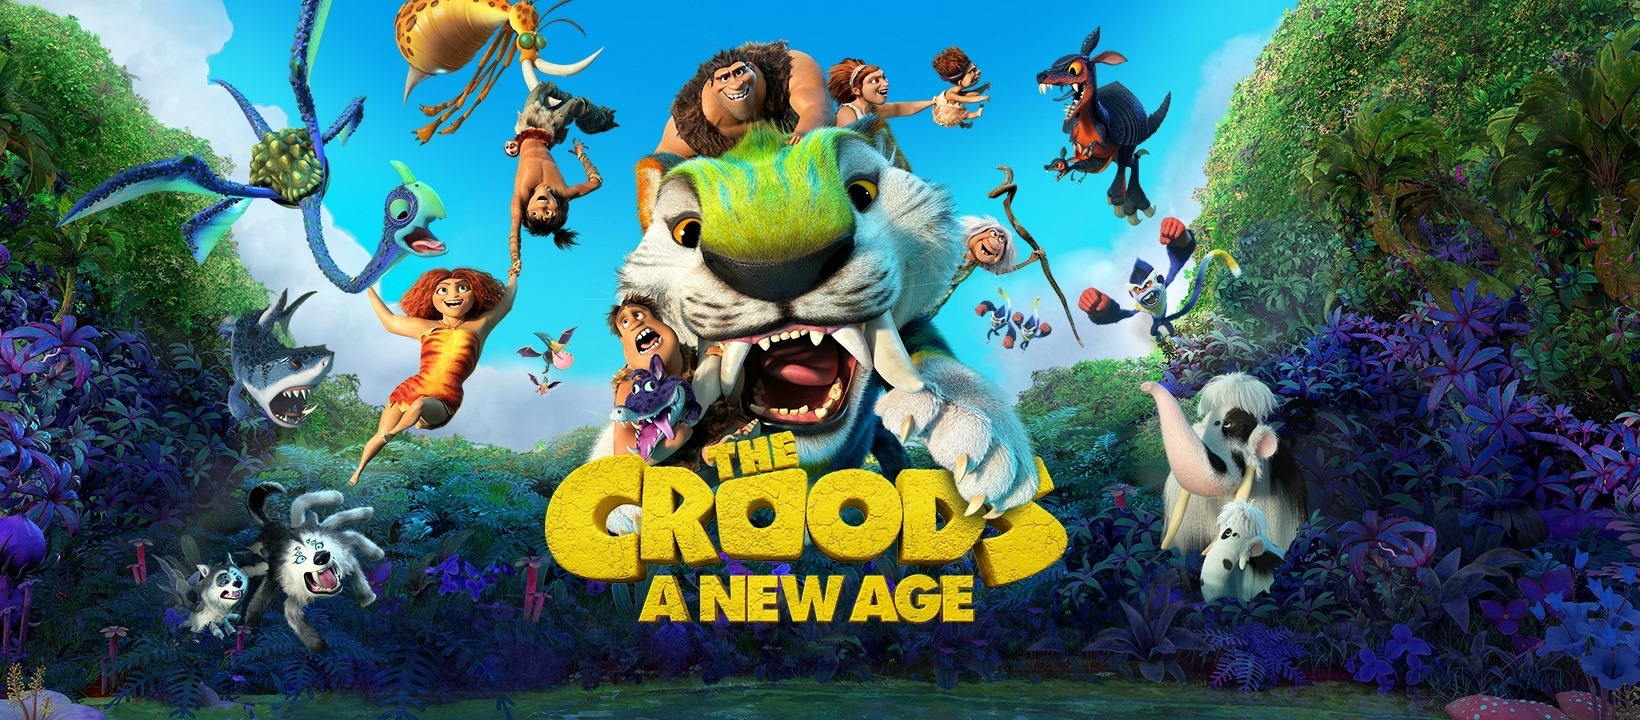 Event Promo Photo For 'The Croods : A New Age'